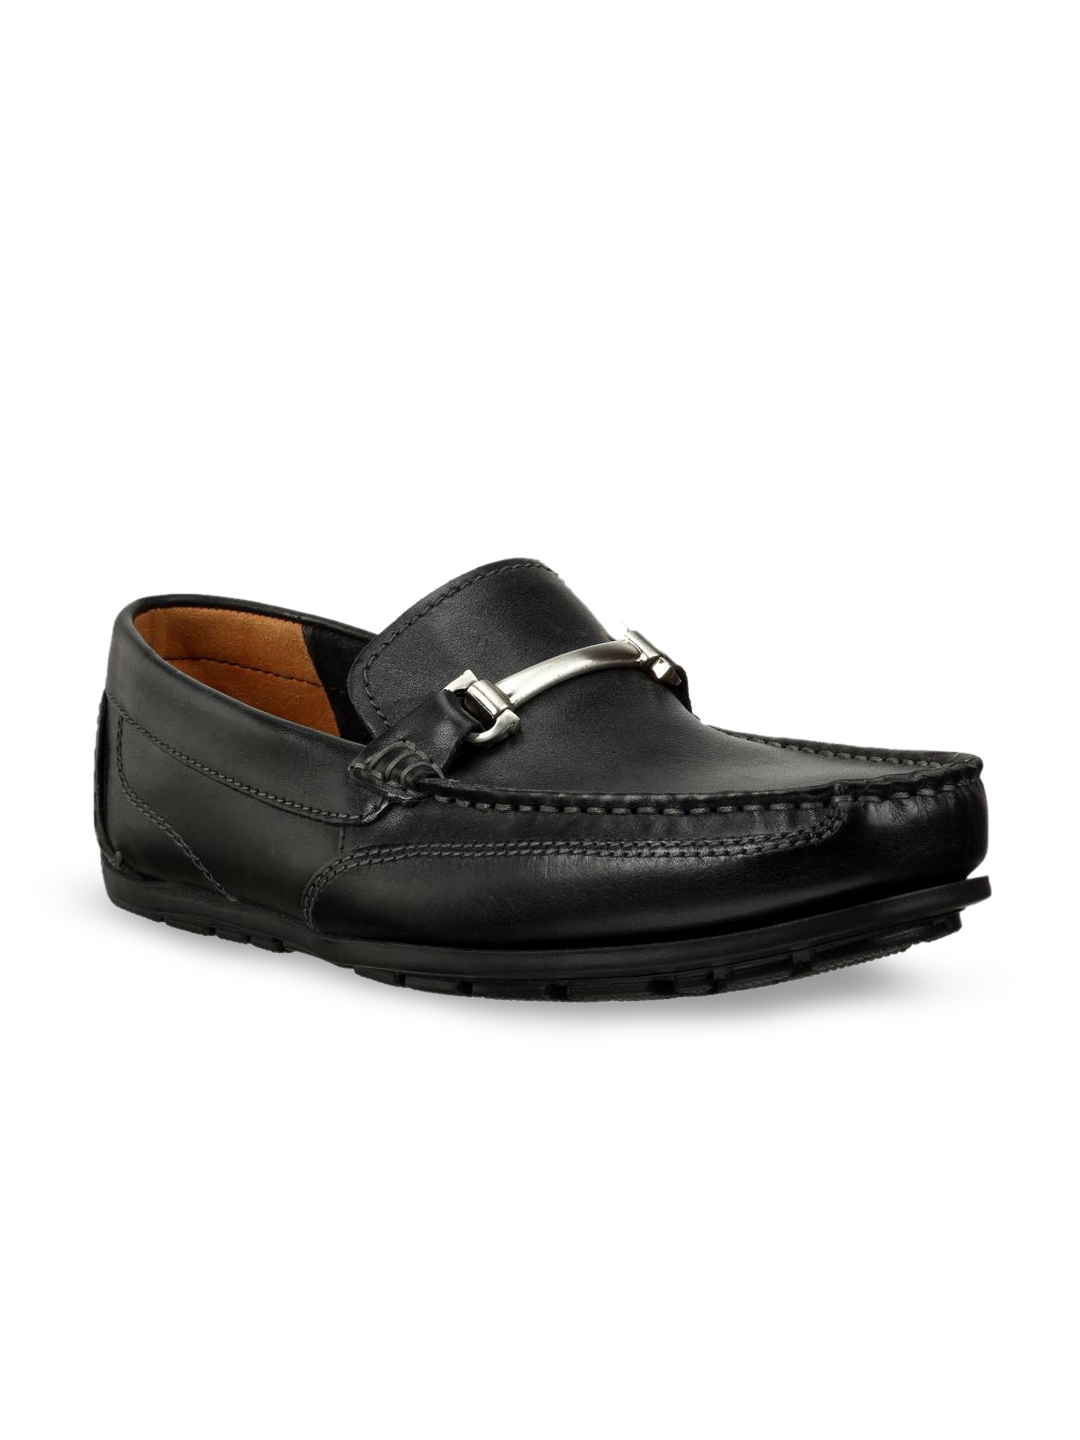 Buy Clarks Men Black Loafers - Casual Shoes for Men 10383737 | Myntra